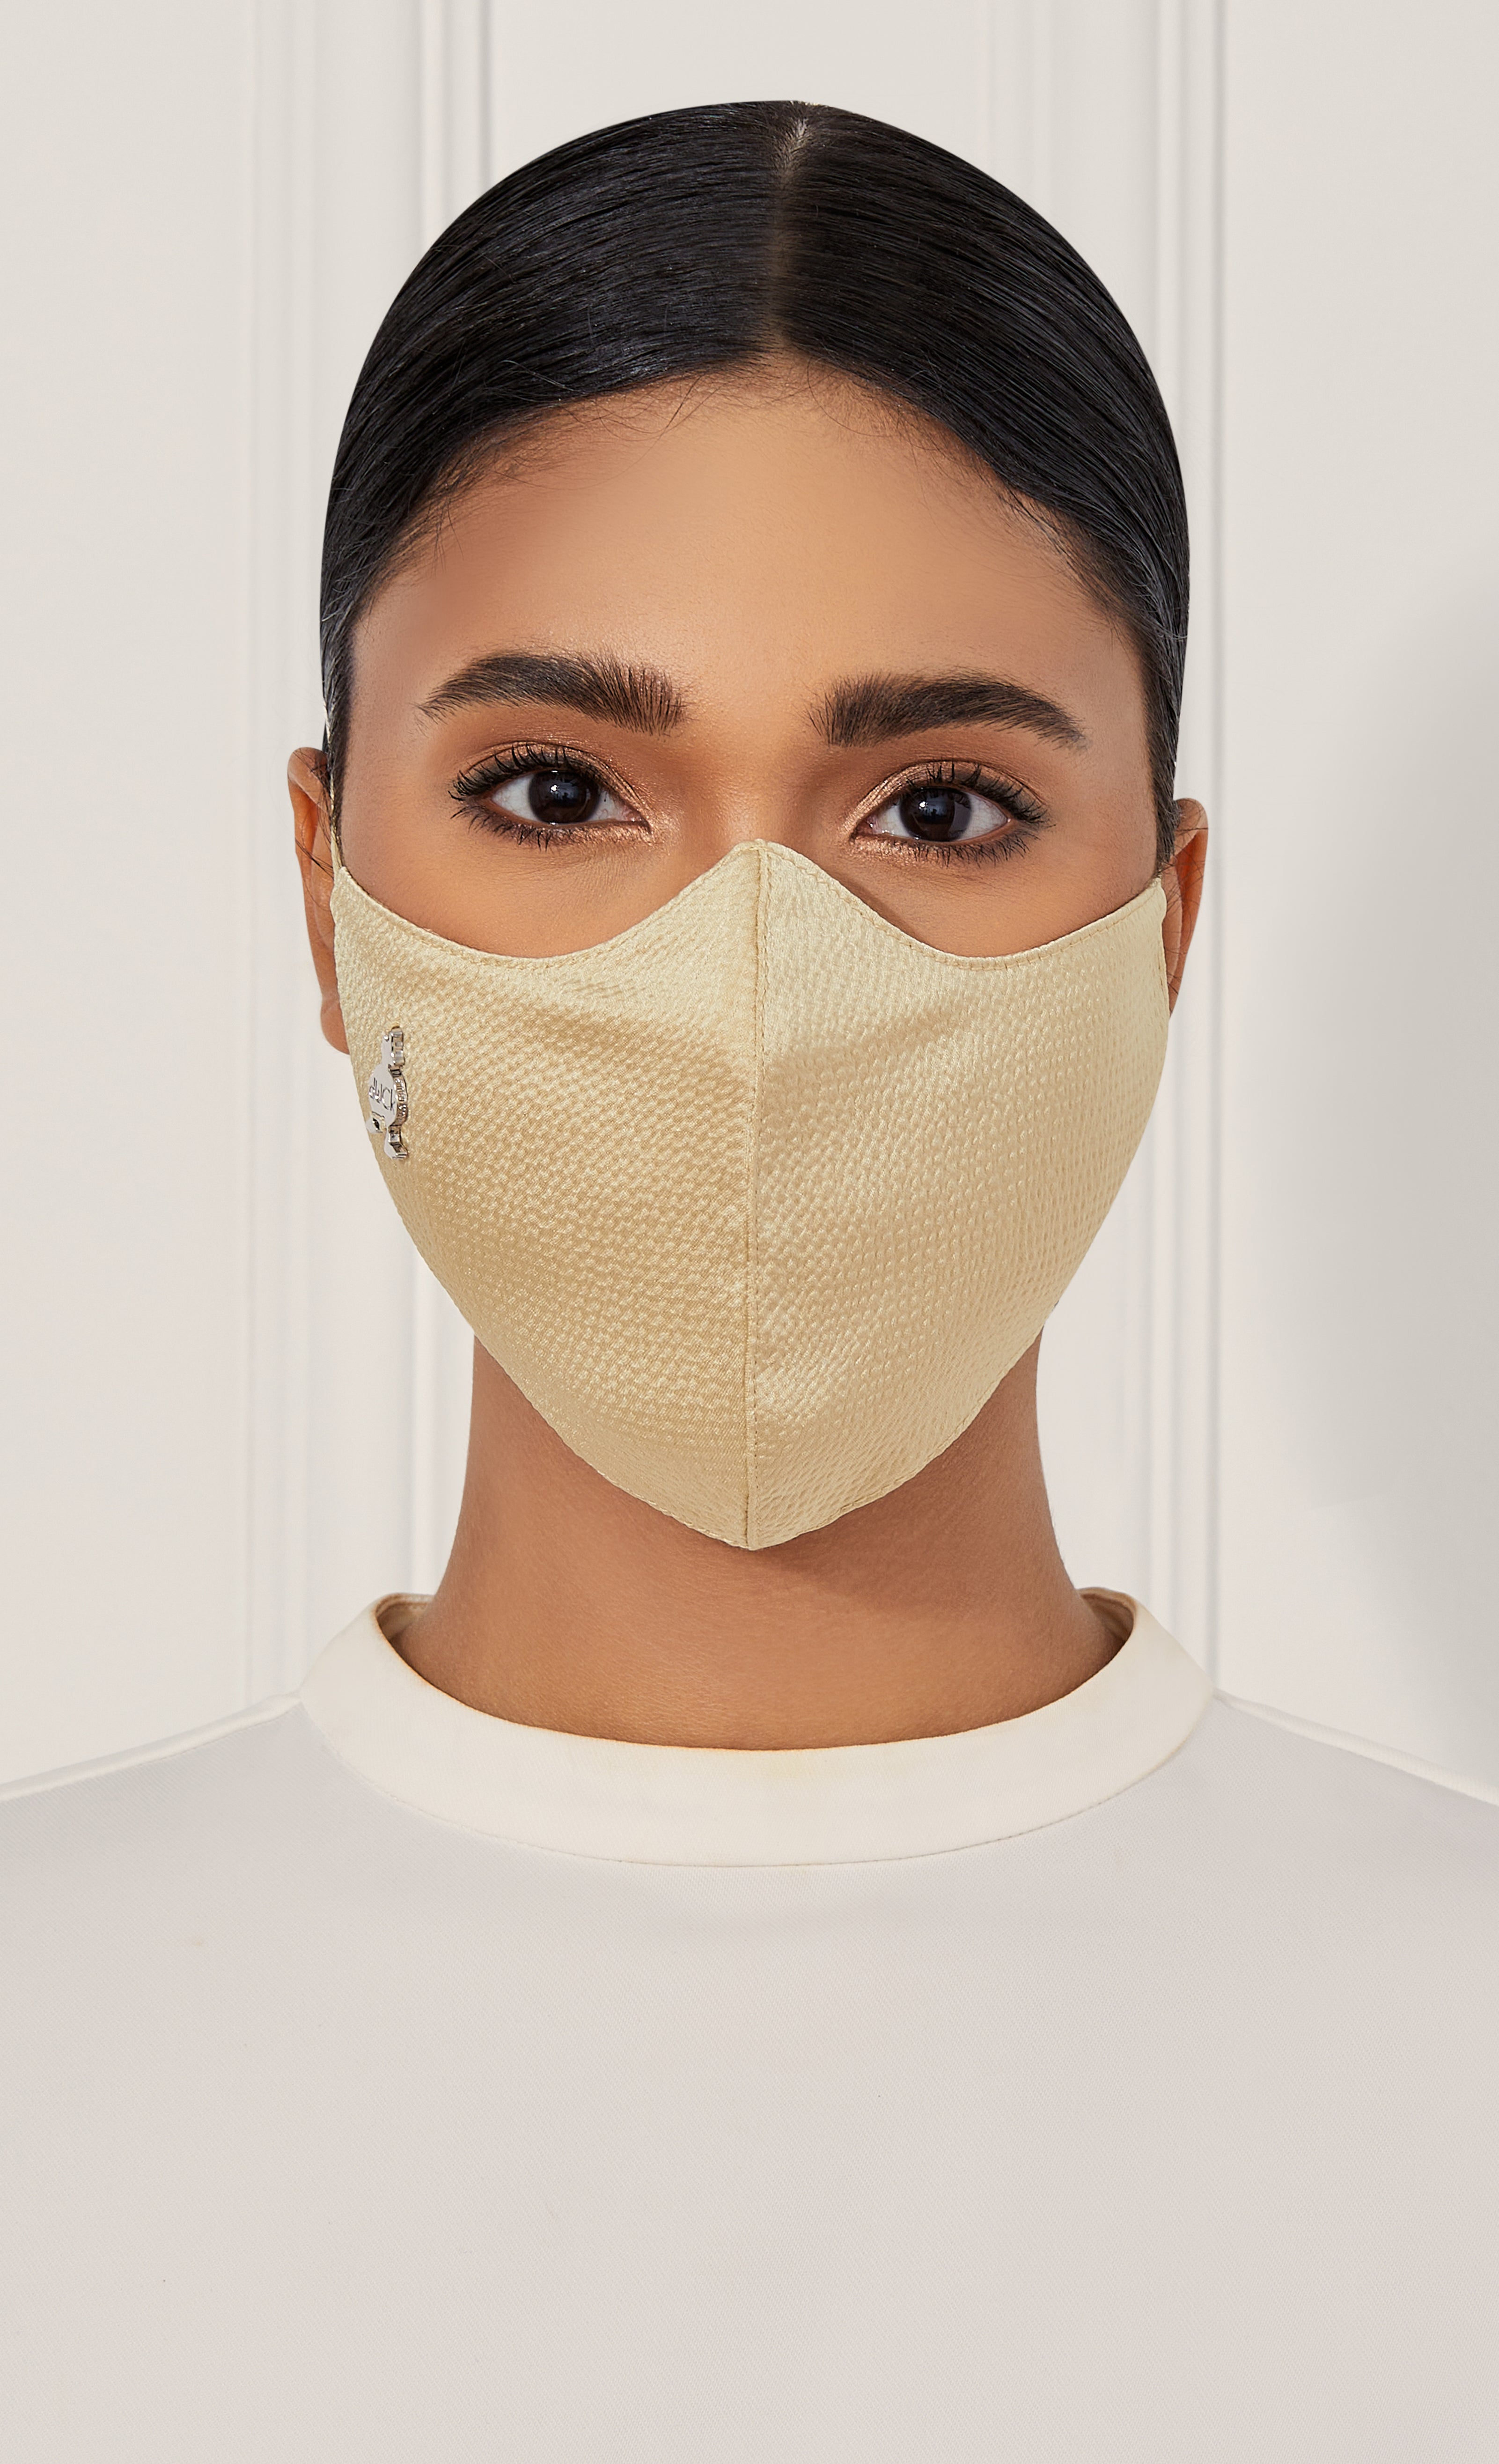 Woven Face Mask (Head-loop) in Honey Toast